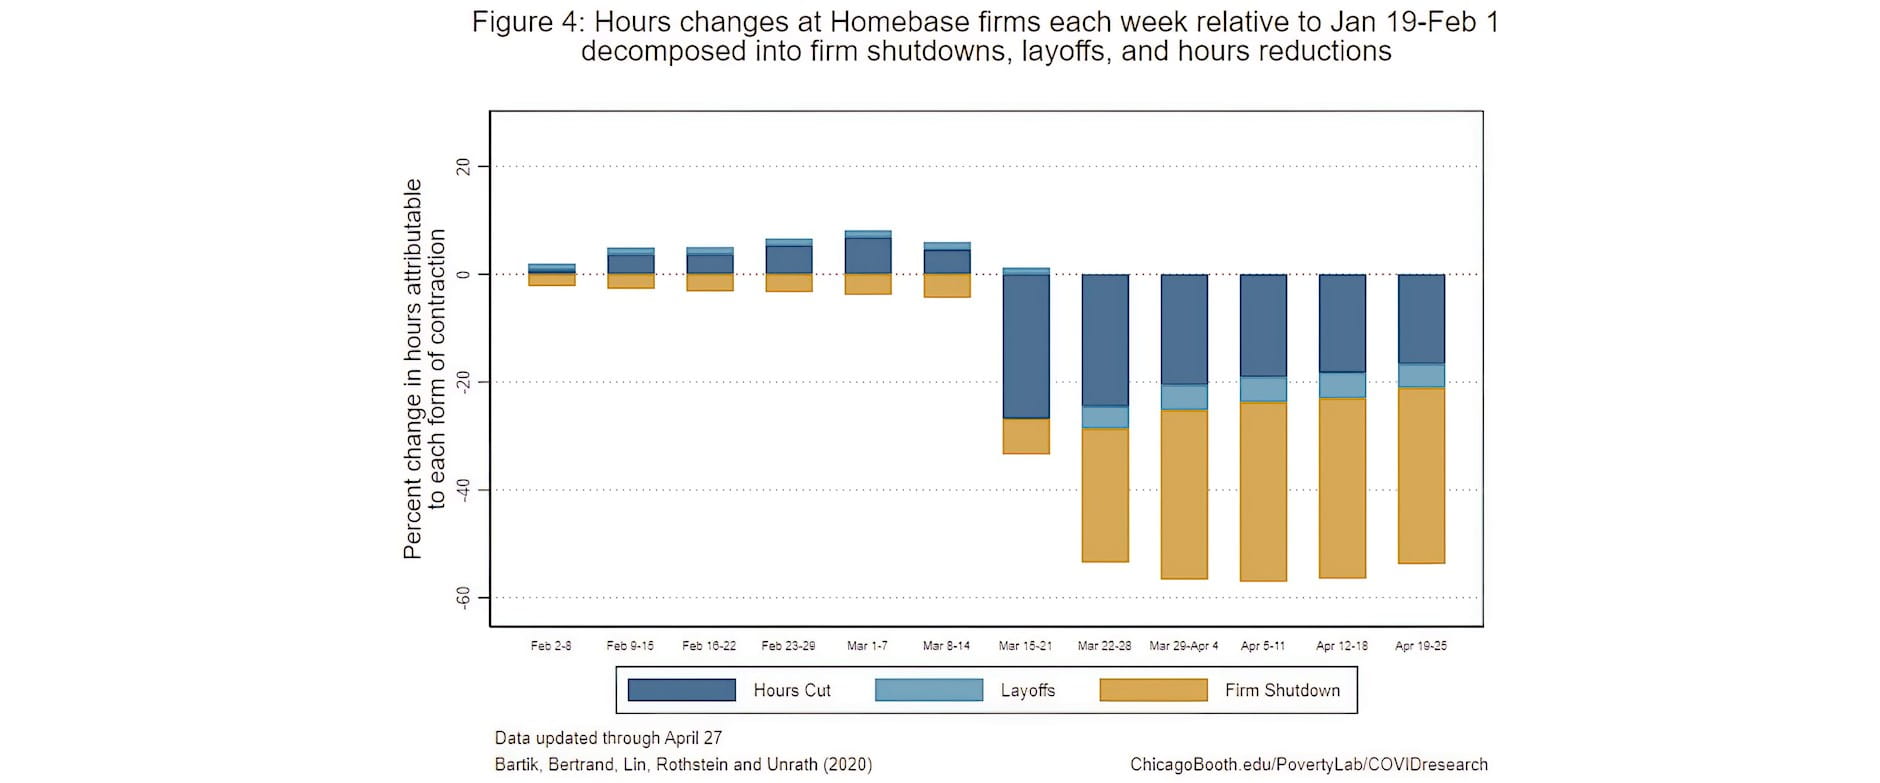 Figure 4: Hours changes at Homebase firms each week relative to Jan 19-Feb 1